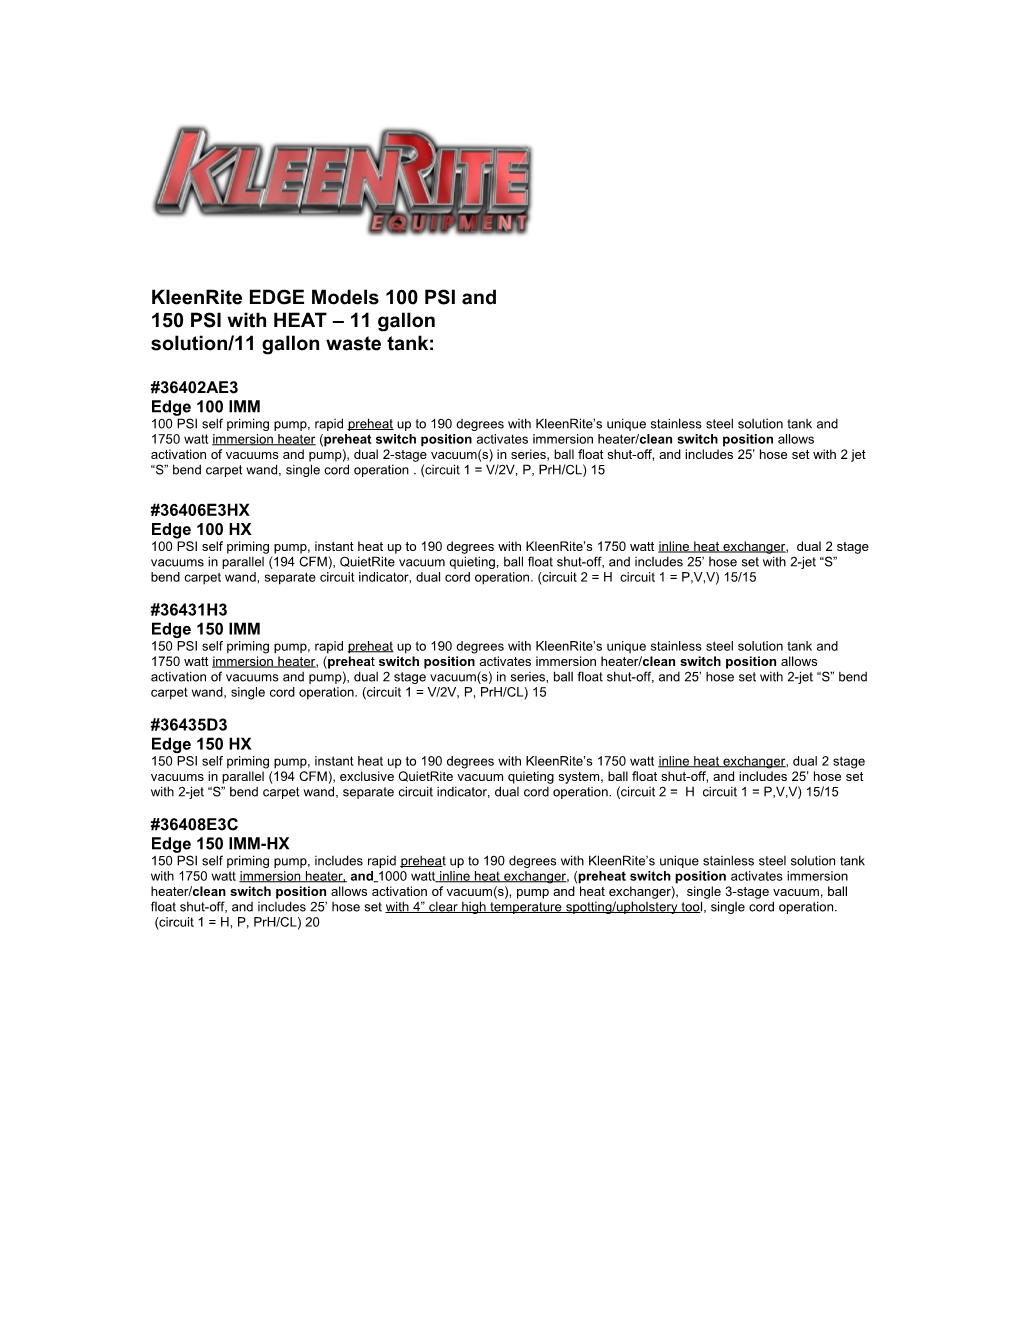 Kleenrite EDGE Models 100 PSI and 150 PSI with HEAT 11 Gallon Solution/11 Gallon Waste Tank